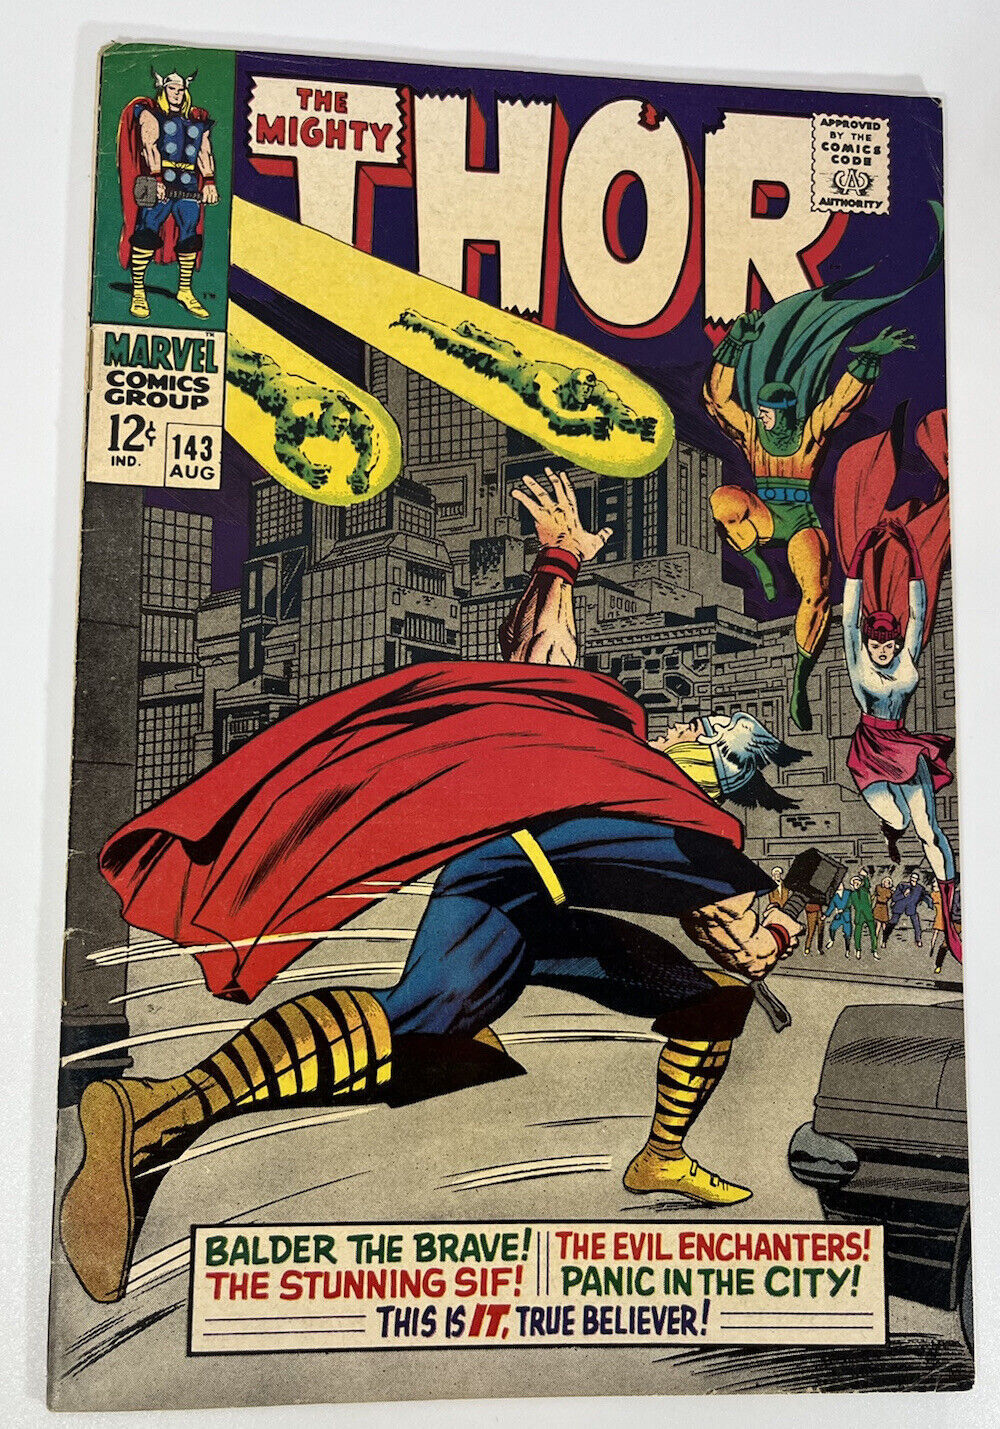 Thor #143 (1967) in 6.0 Fine